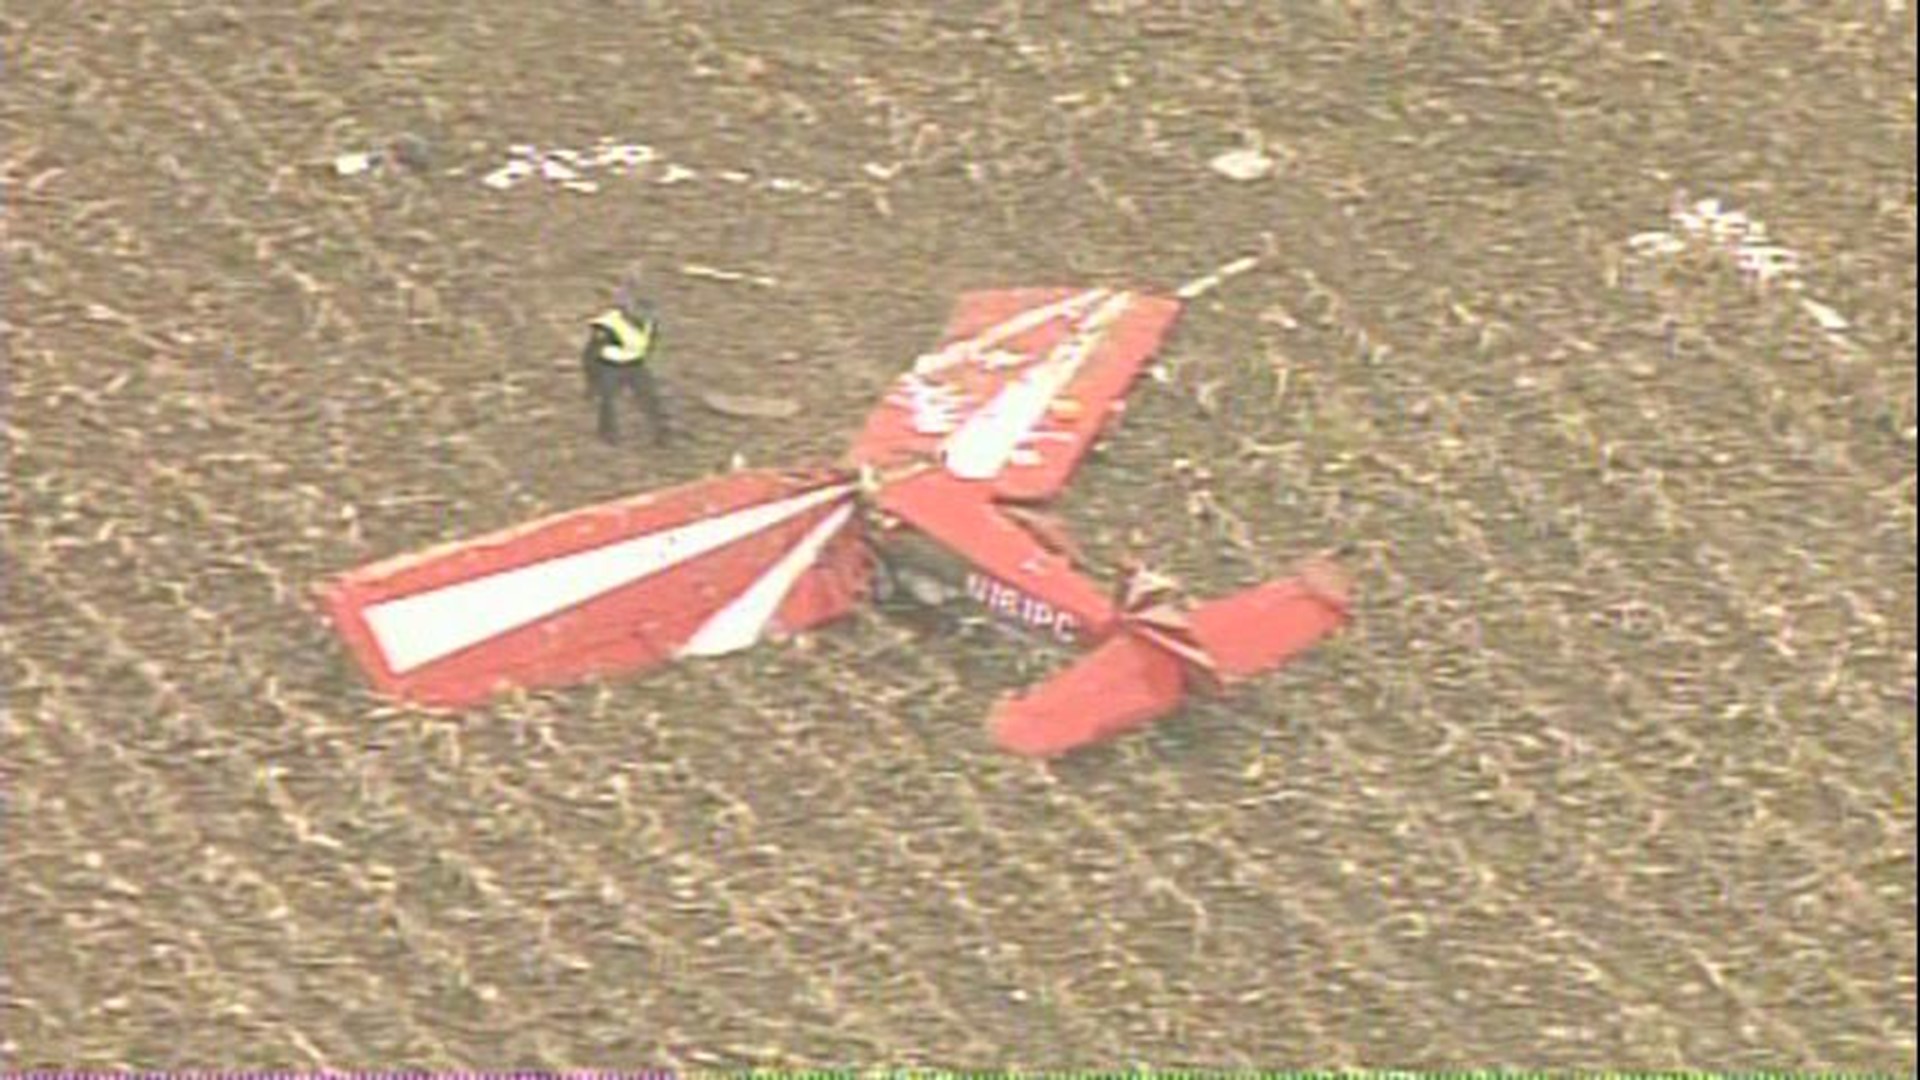 Pilot Who Crashed Plane In Union County Field Dies